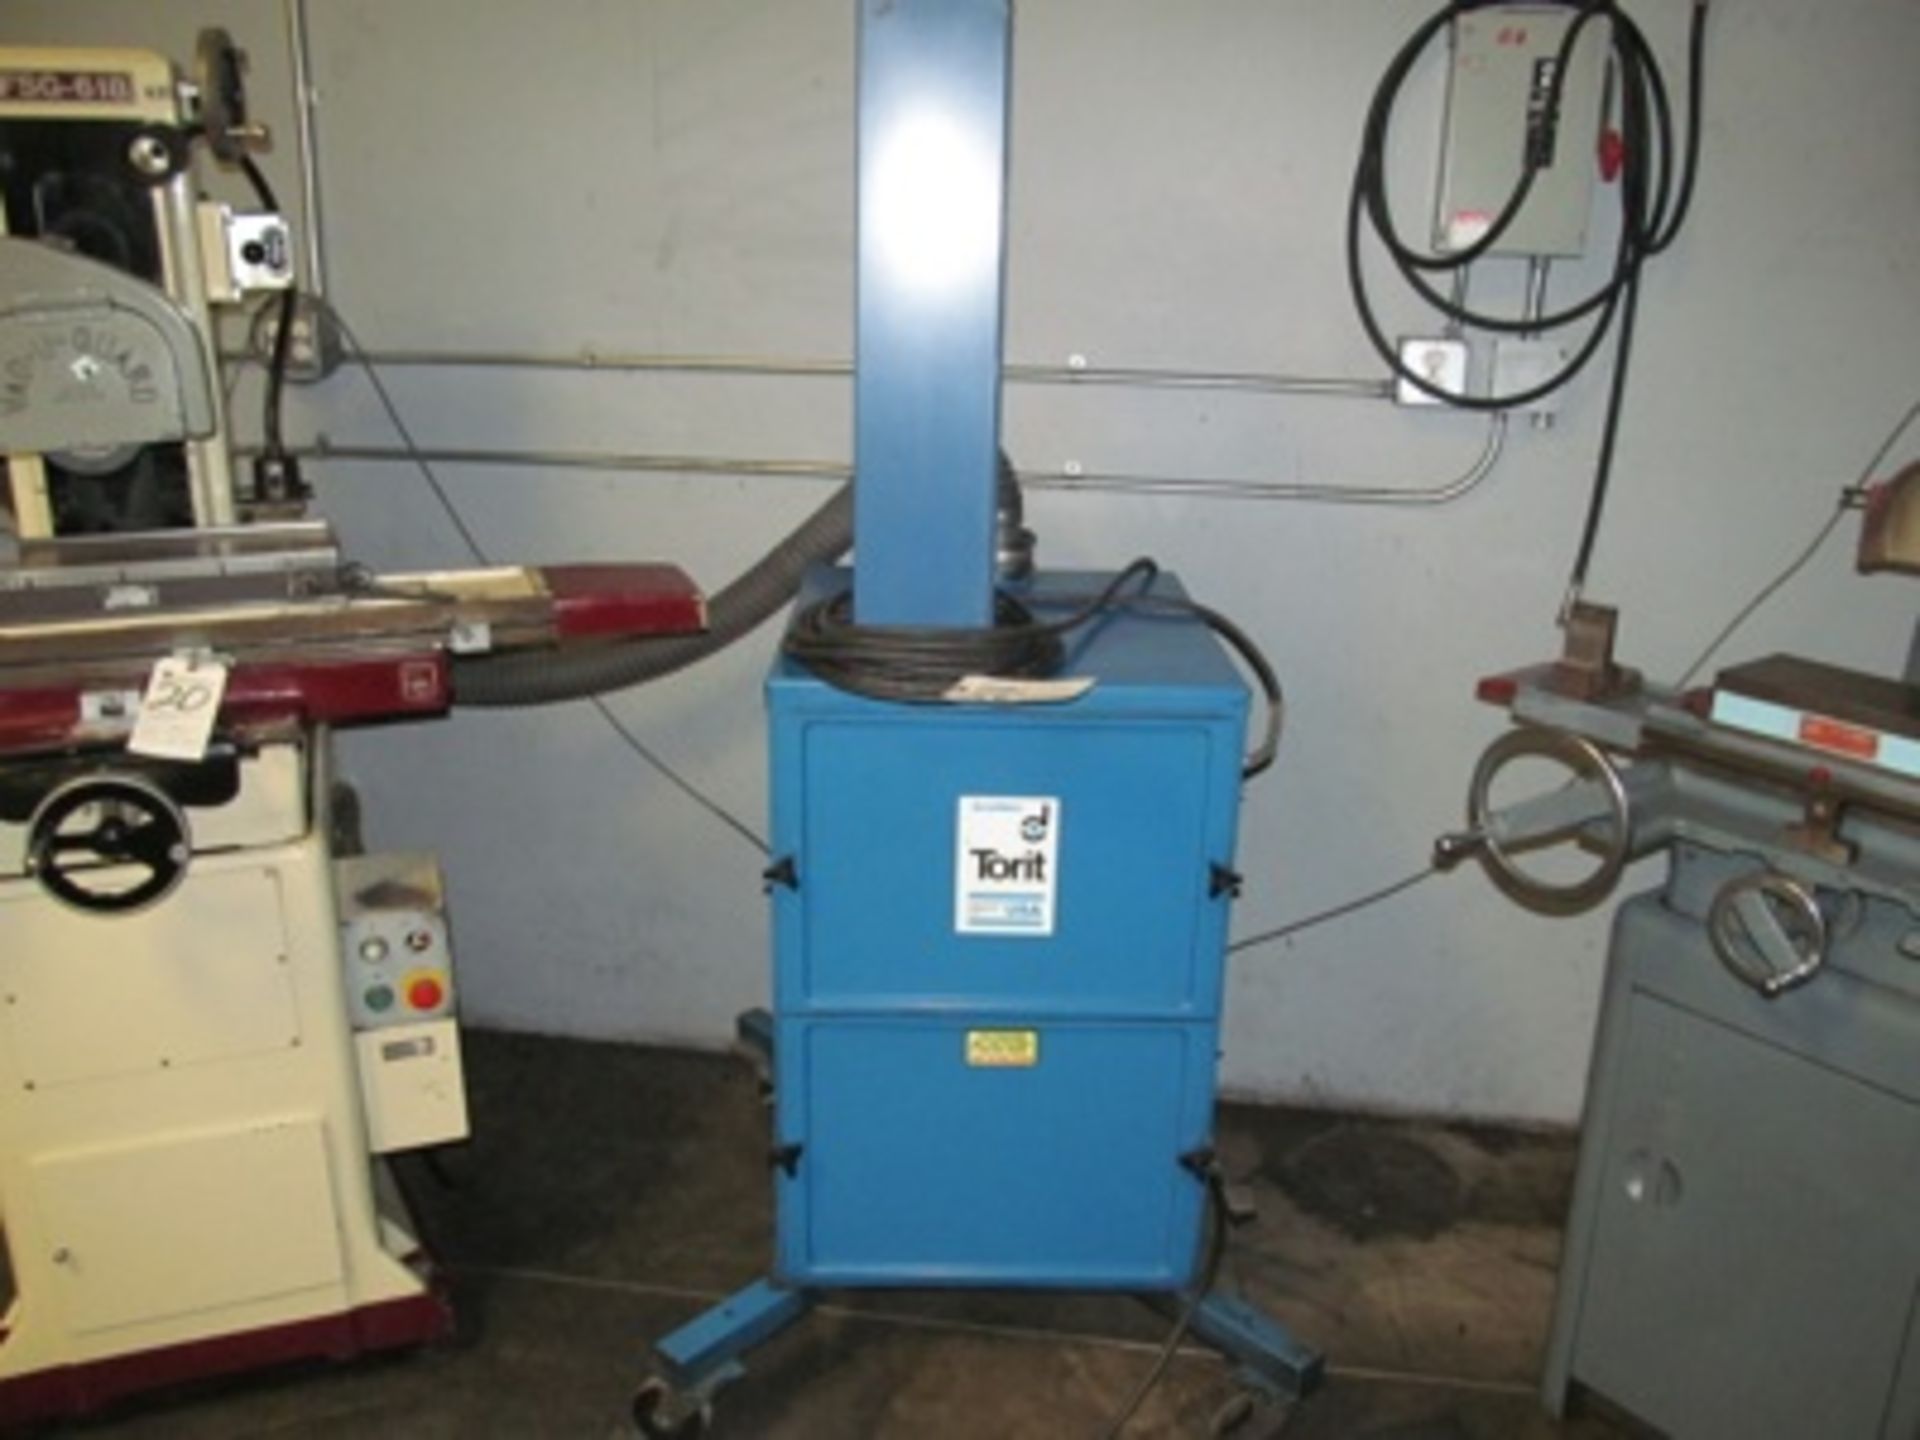 Donaldson Torit mod. 60, Portable Dust Collection System, 3/4hp, 6-Cycle, 3600 RPM; S/N IG19949-7